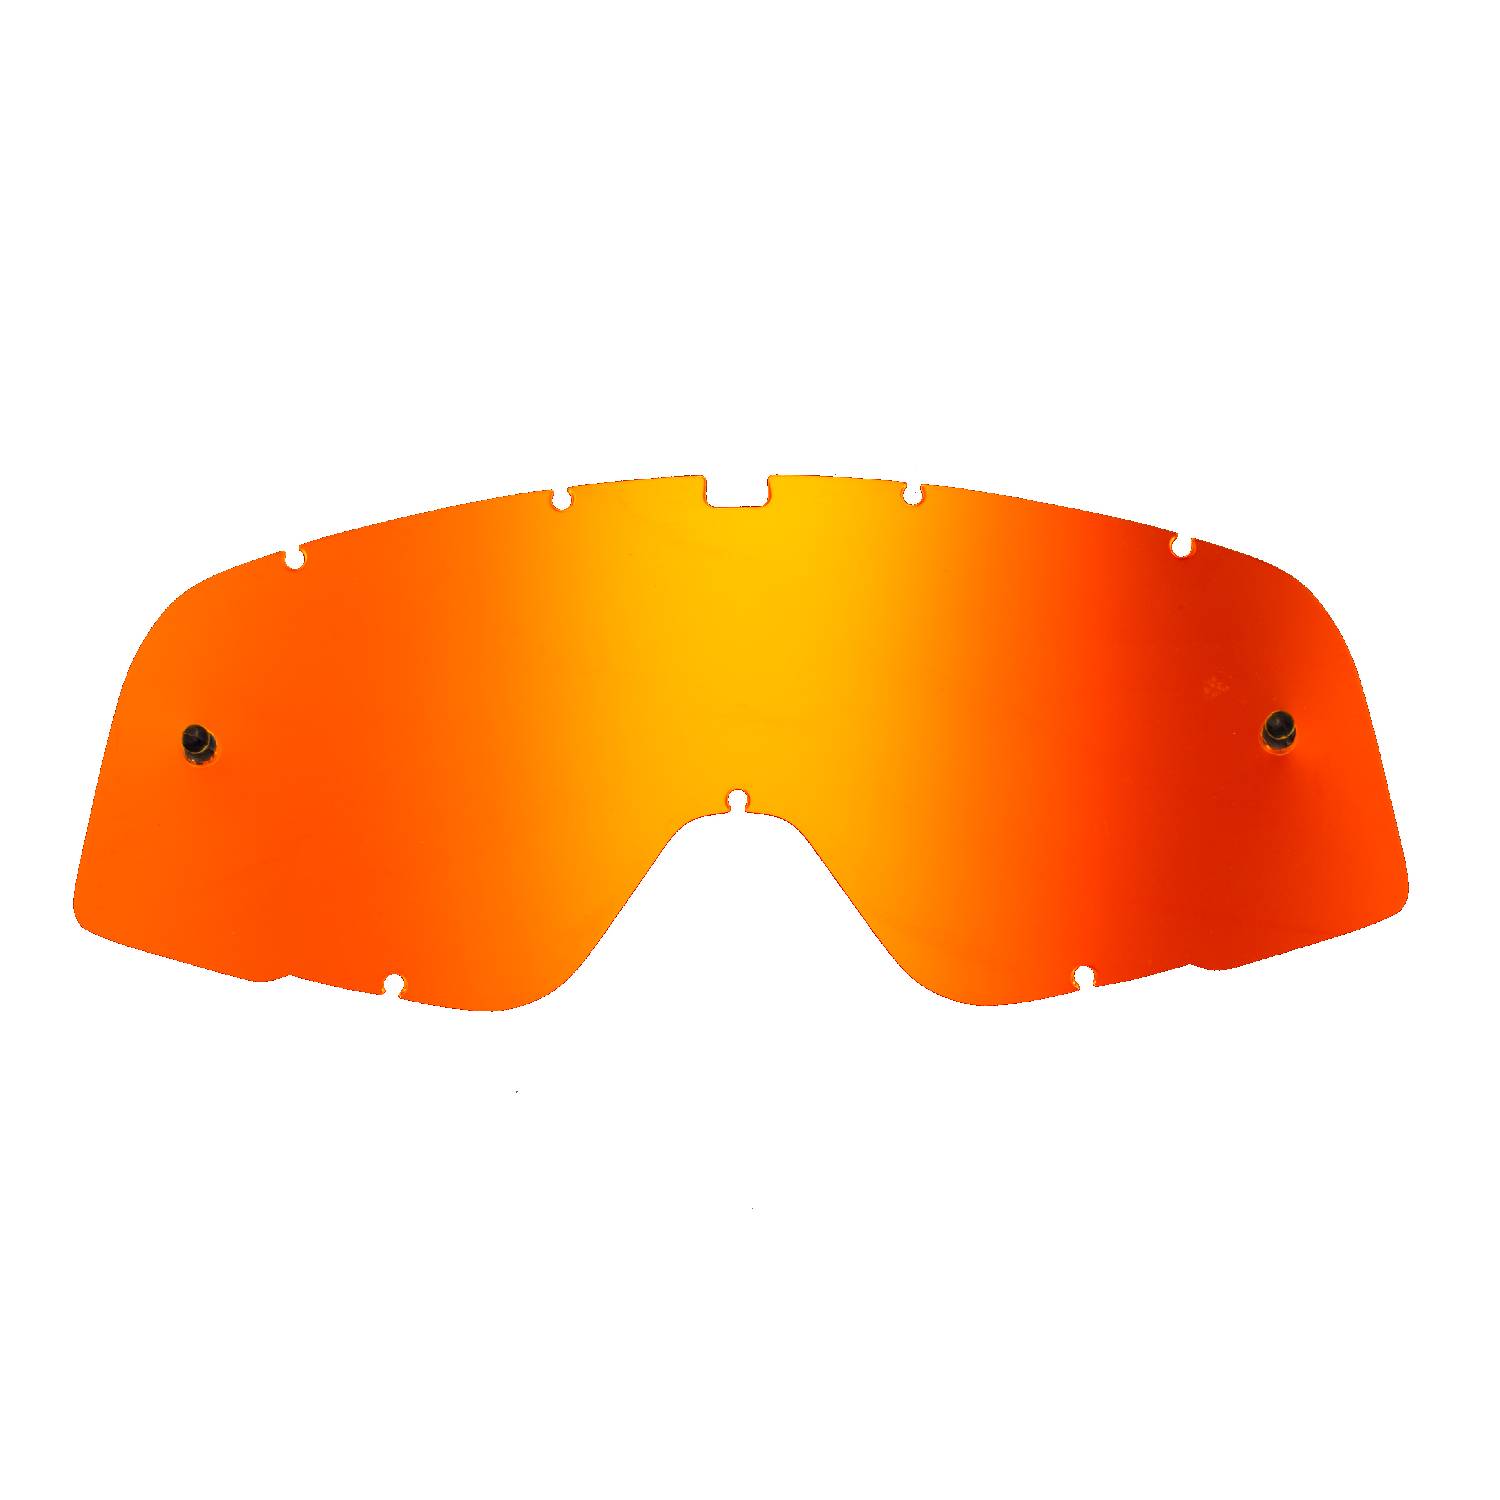 red-toned mirrored replacement lenses for goggles compatible for 100% Barstow goggle